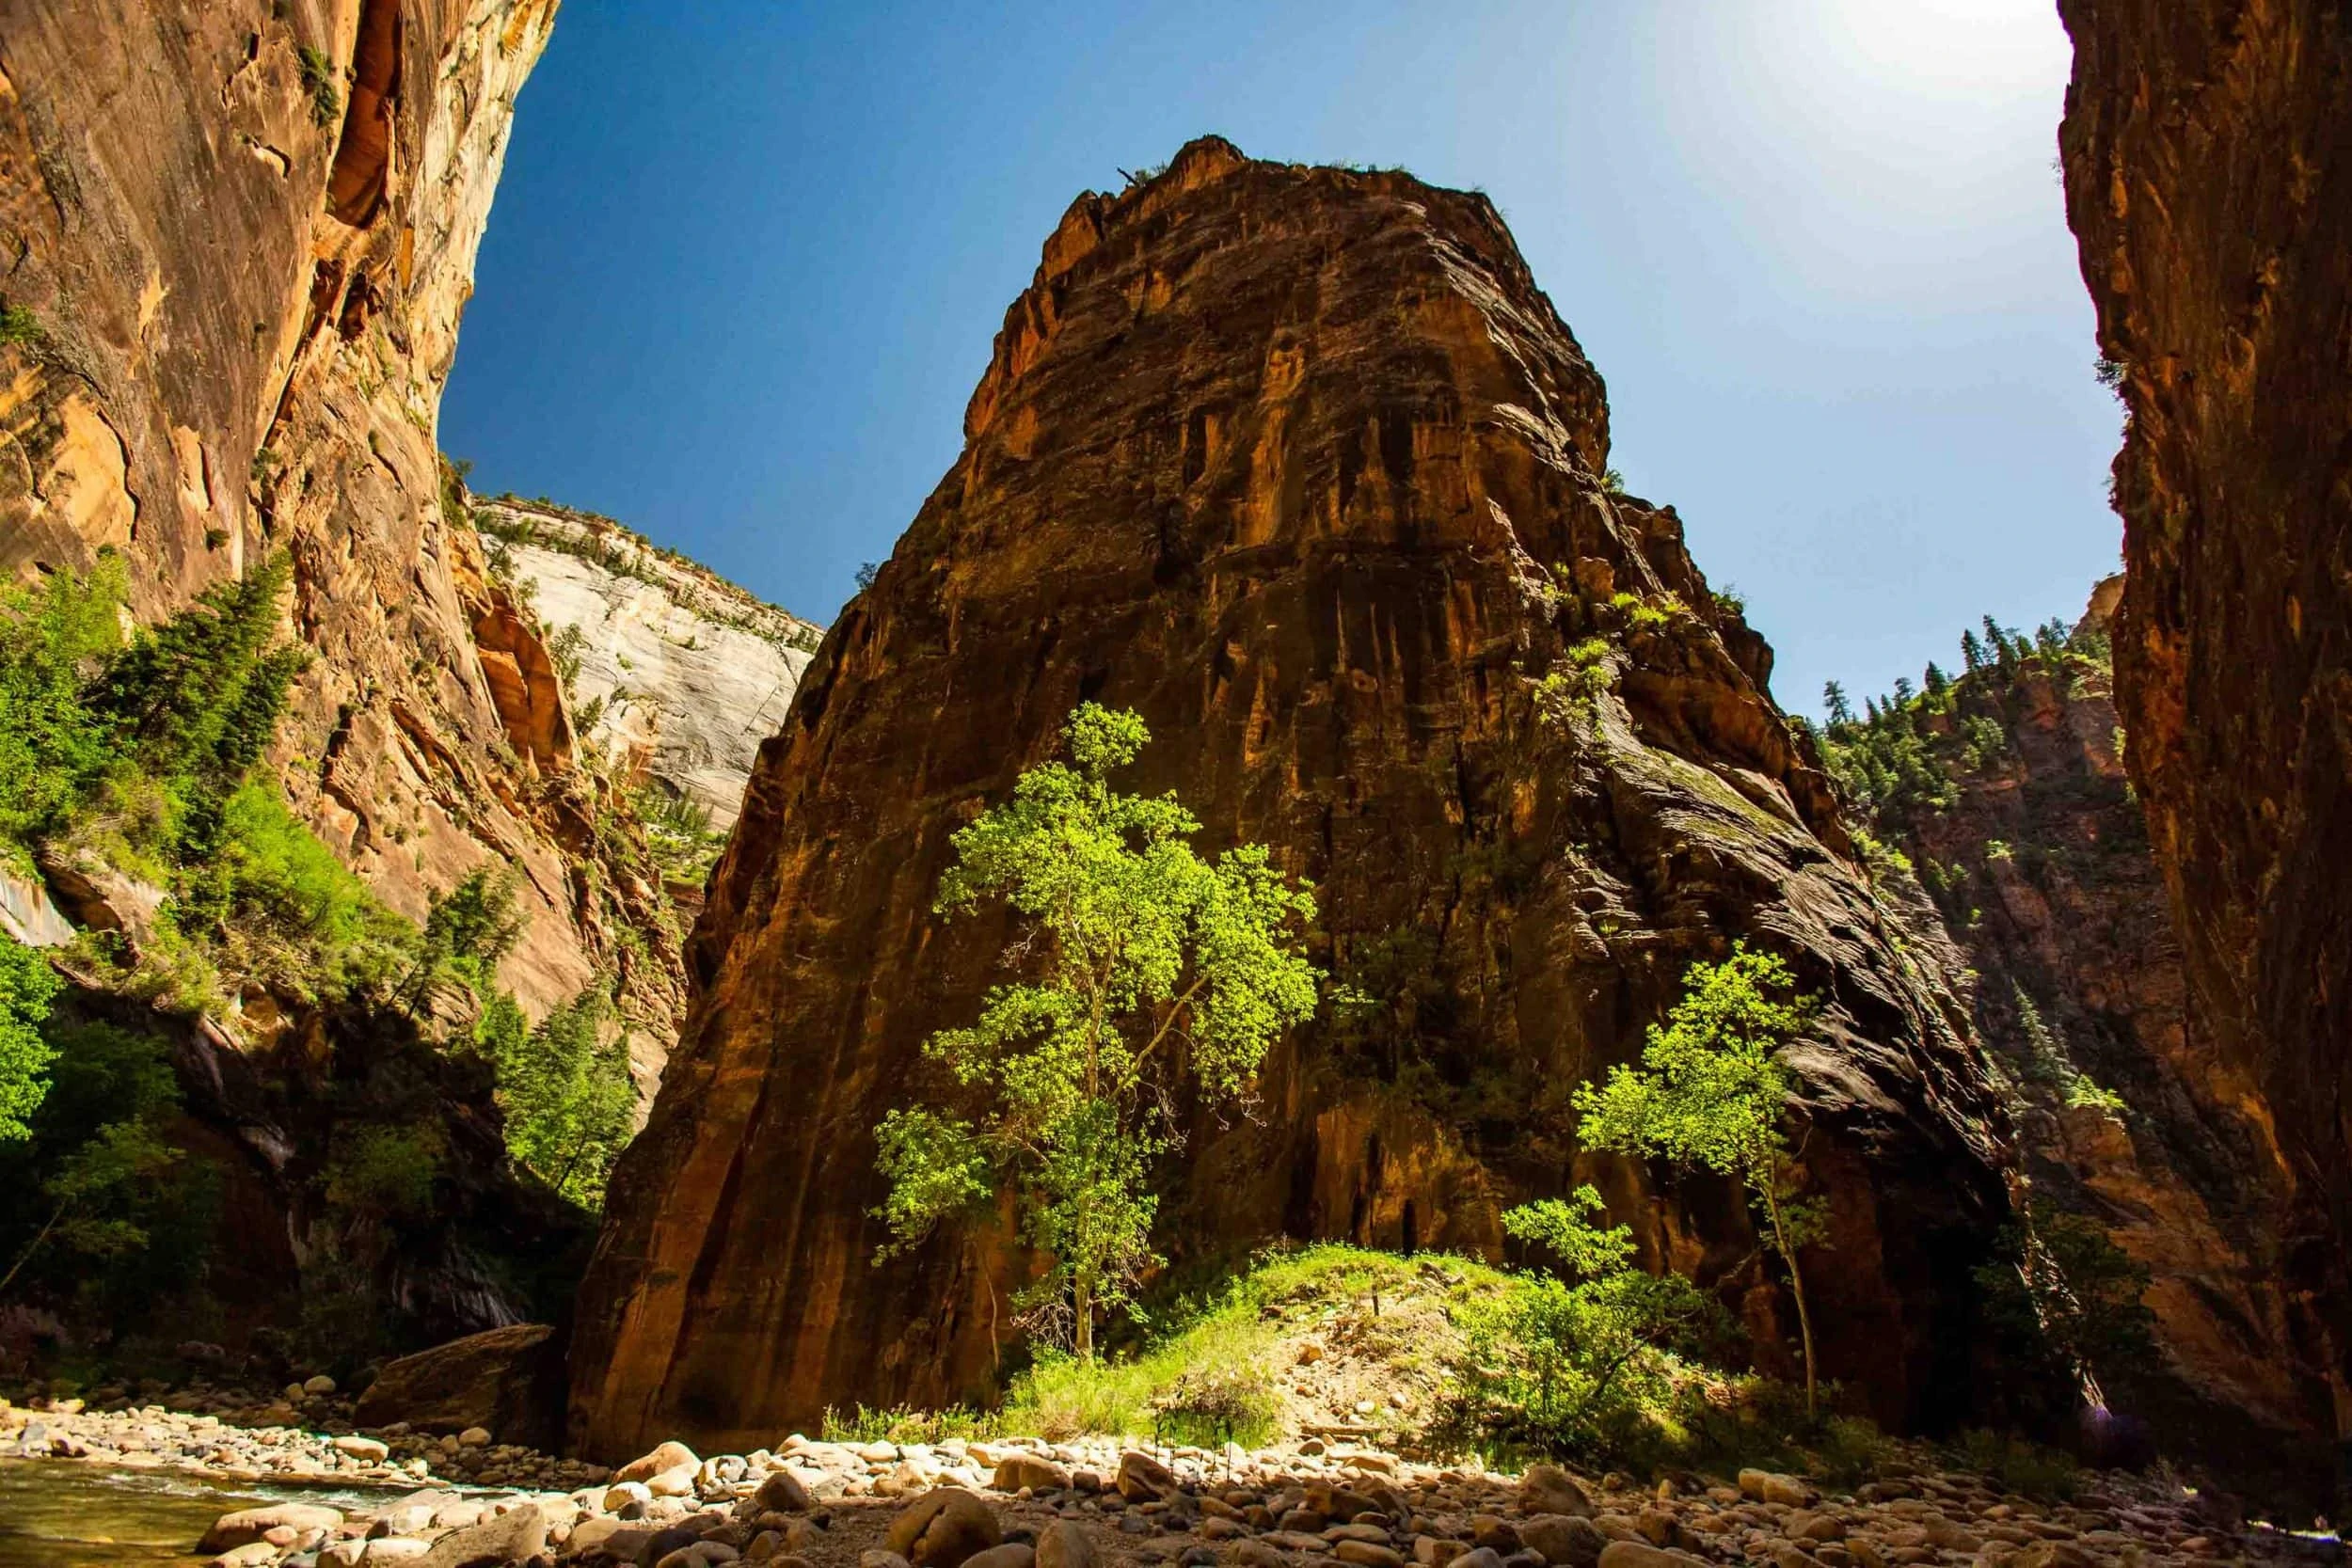 A small, mountain-like natural rock formation is bathed in sunlight at a picturesque possible elopement location, in temple of Sinawava Zion National Park.